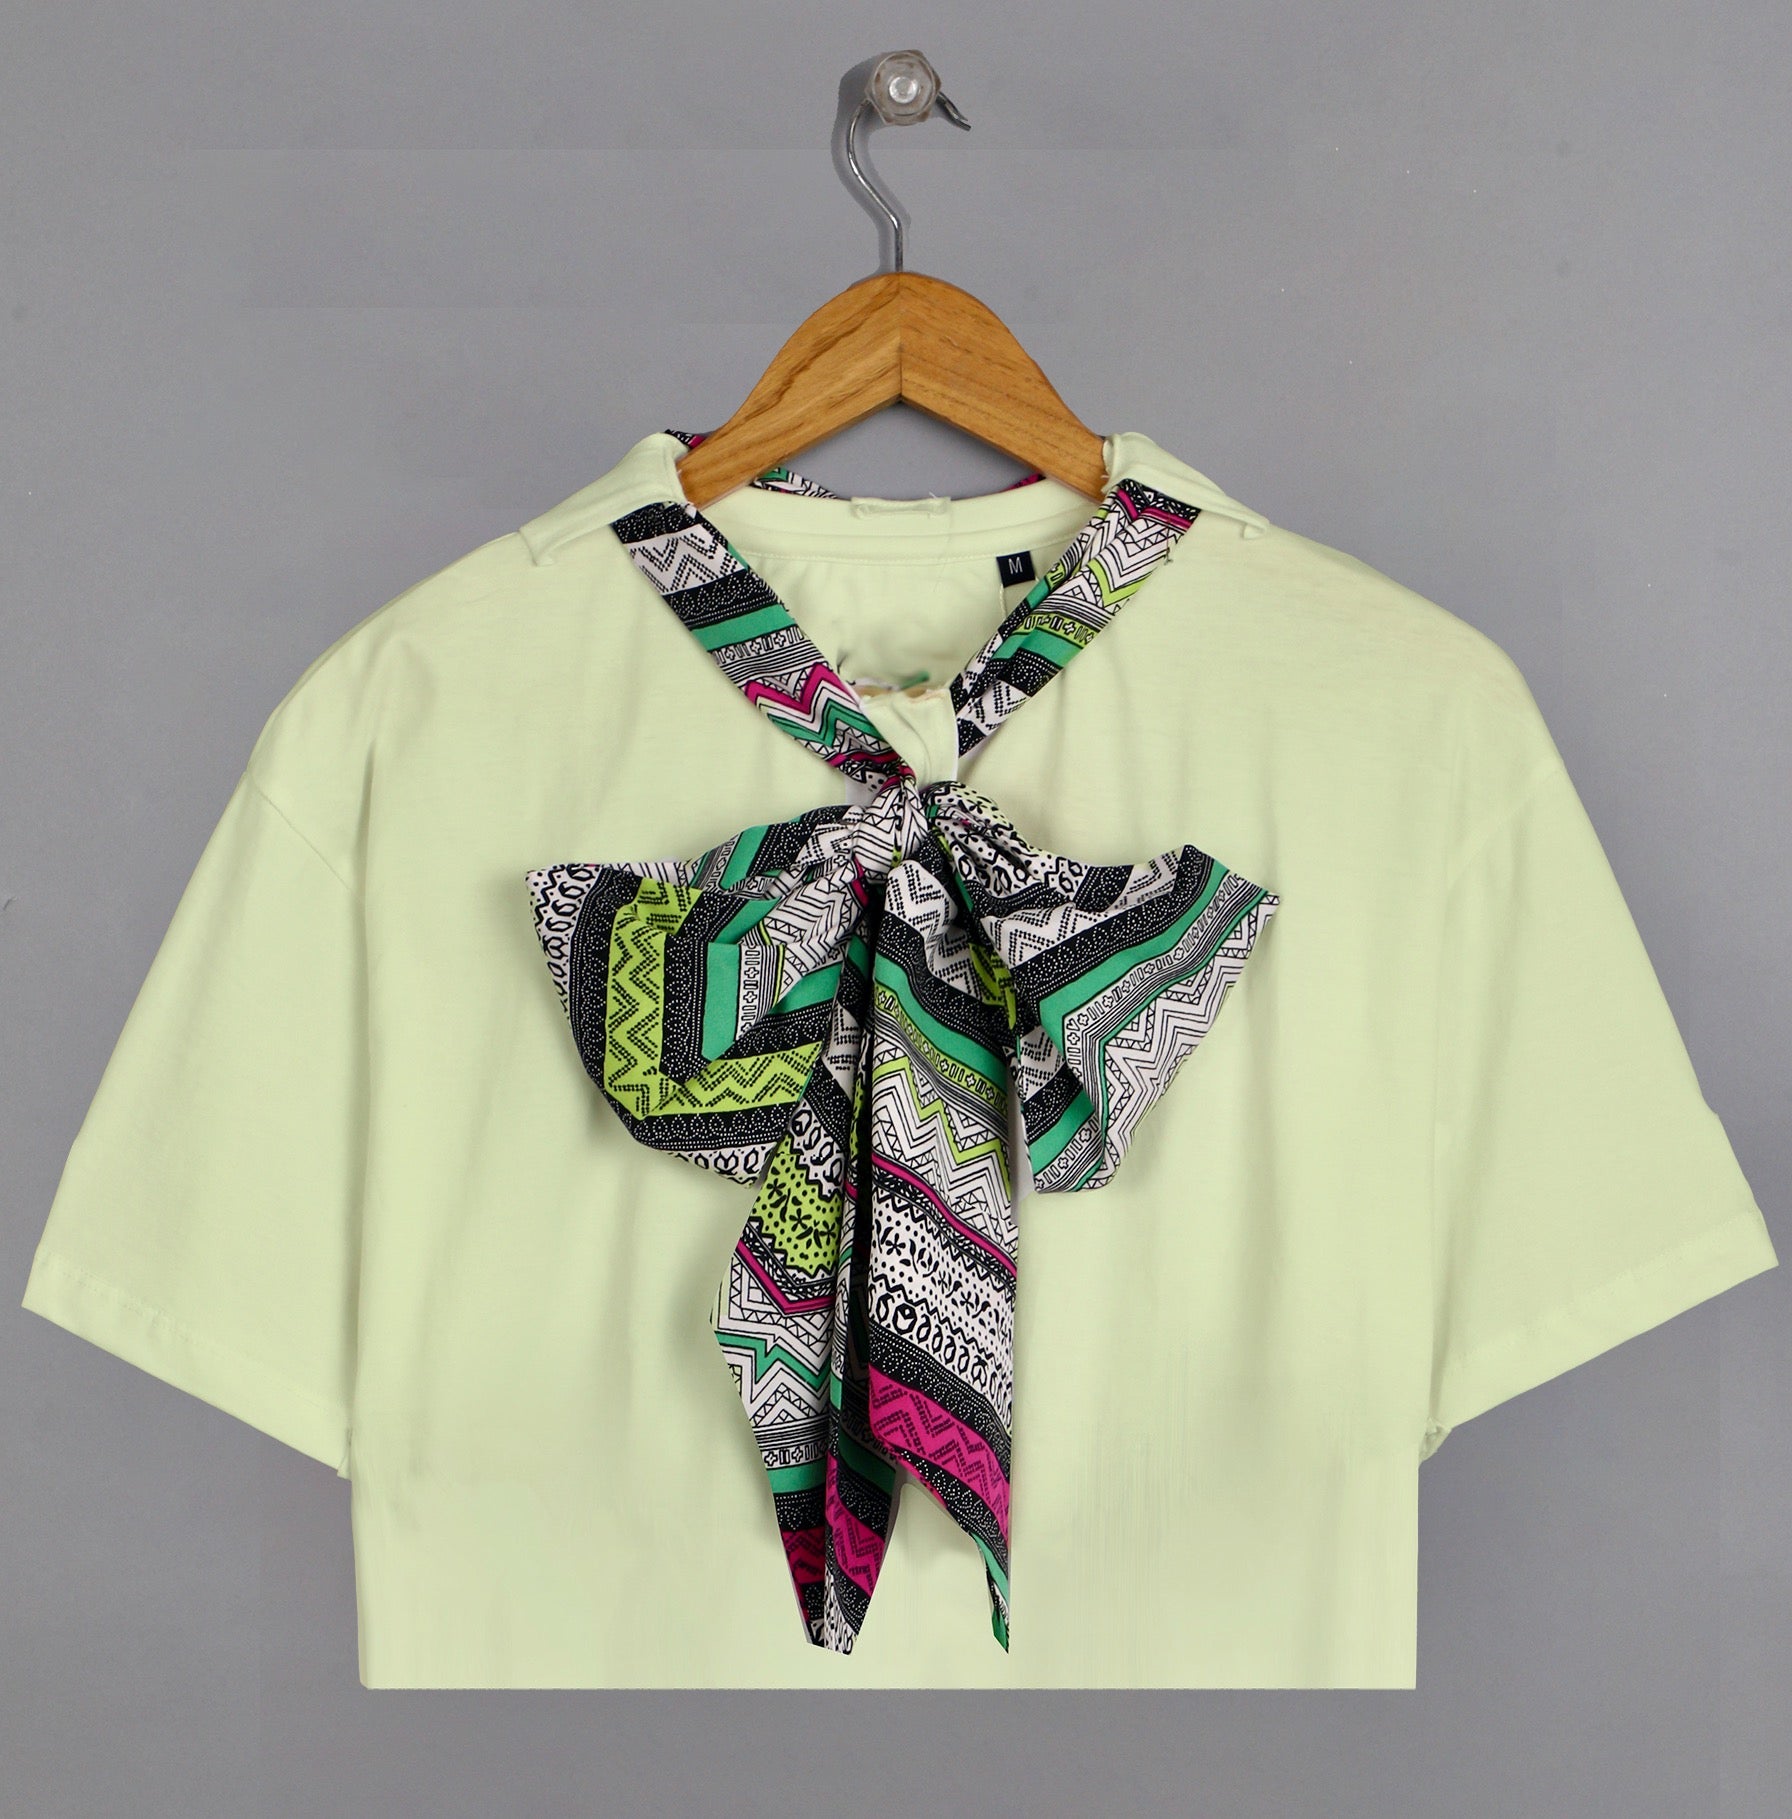 Blossom Trio: Sunflower Yellow, Plum & Mint Green Knot Neck Tie Cropped Tees